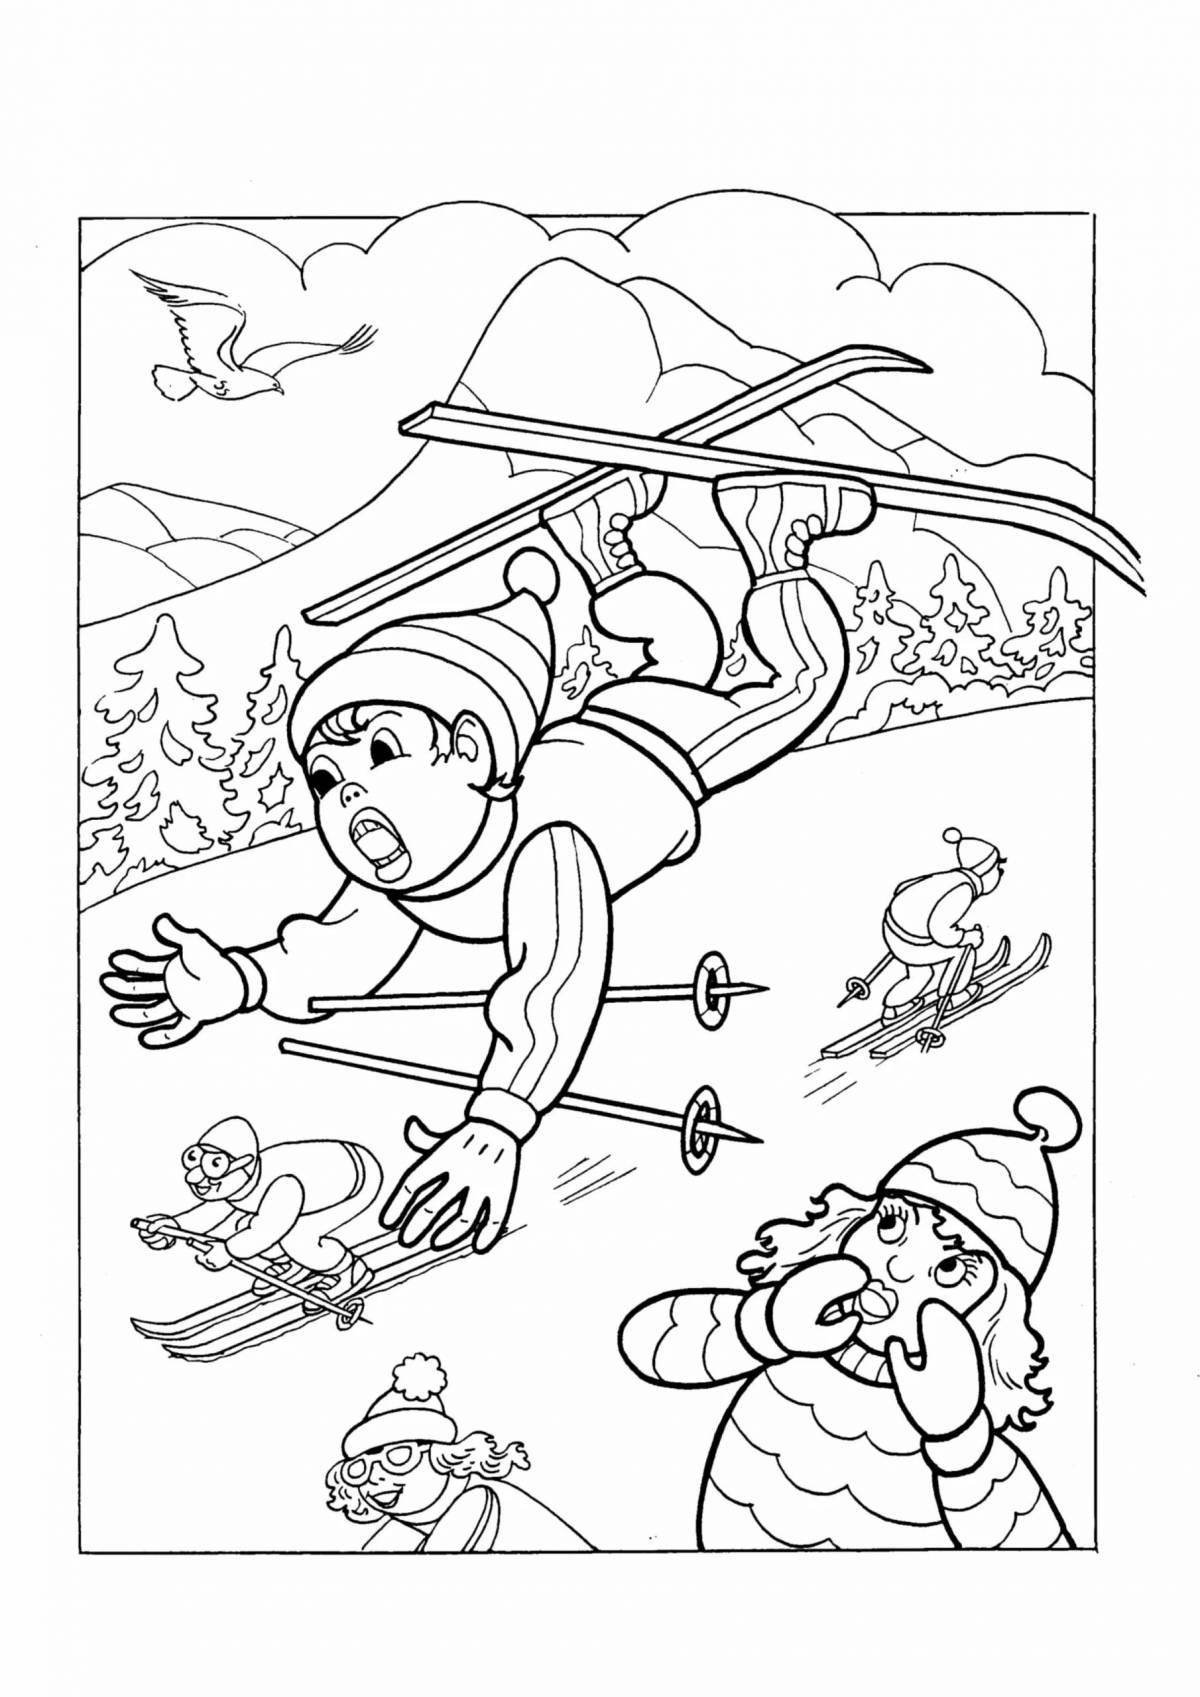 Fun ice safe coloring page